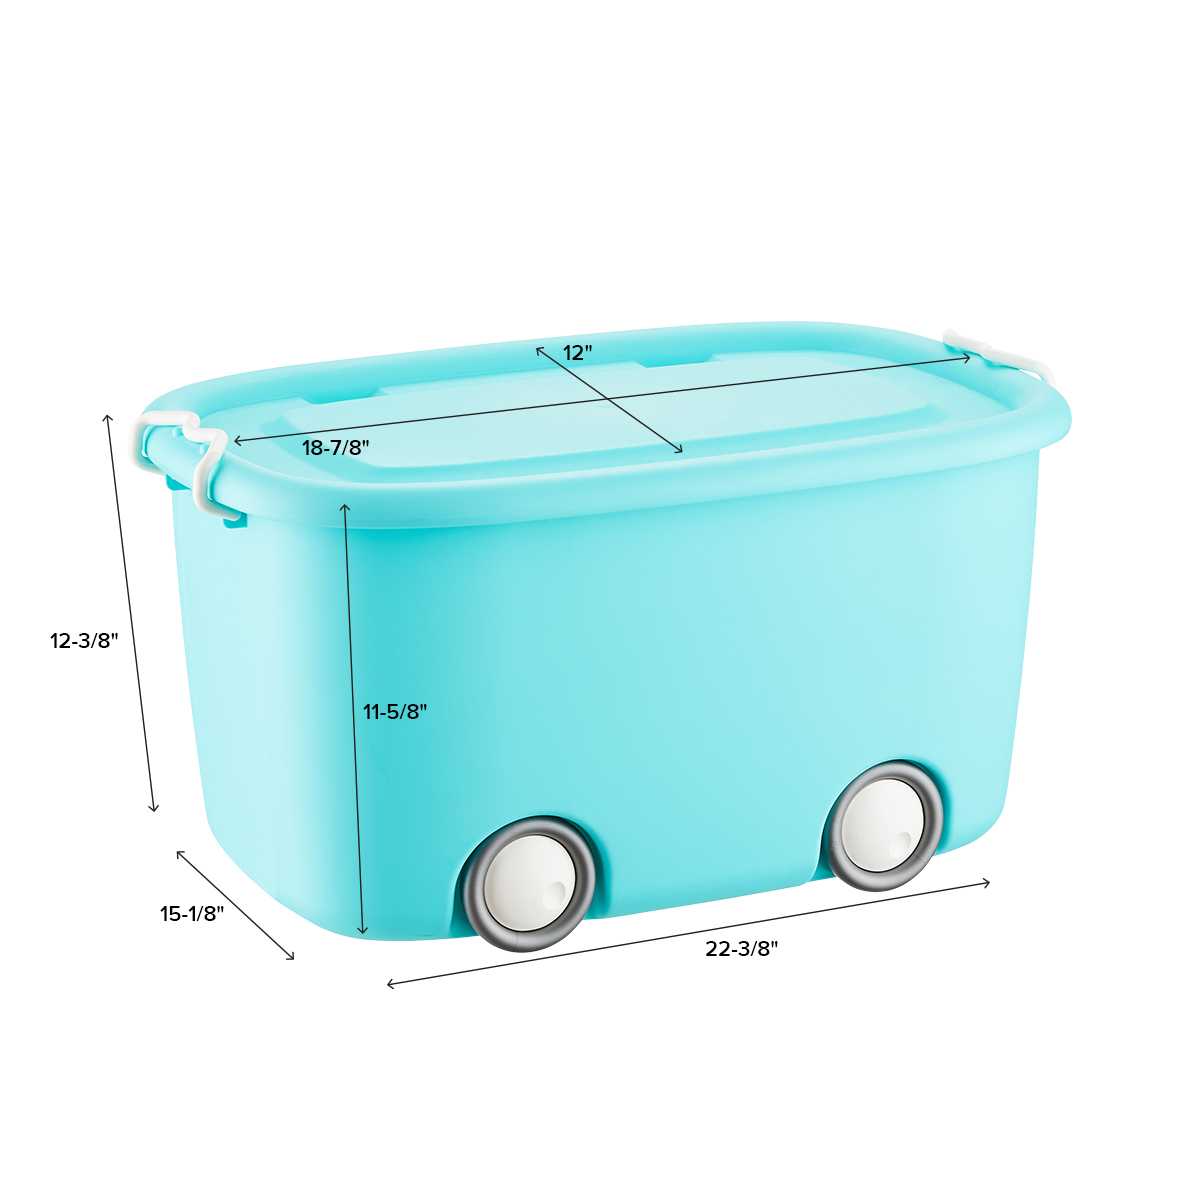 https://www.containerstore.com/catalogimages/421309/10077713-rolling-storage-bin-with-li.jpg